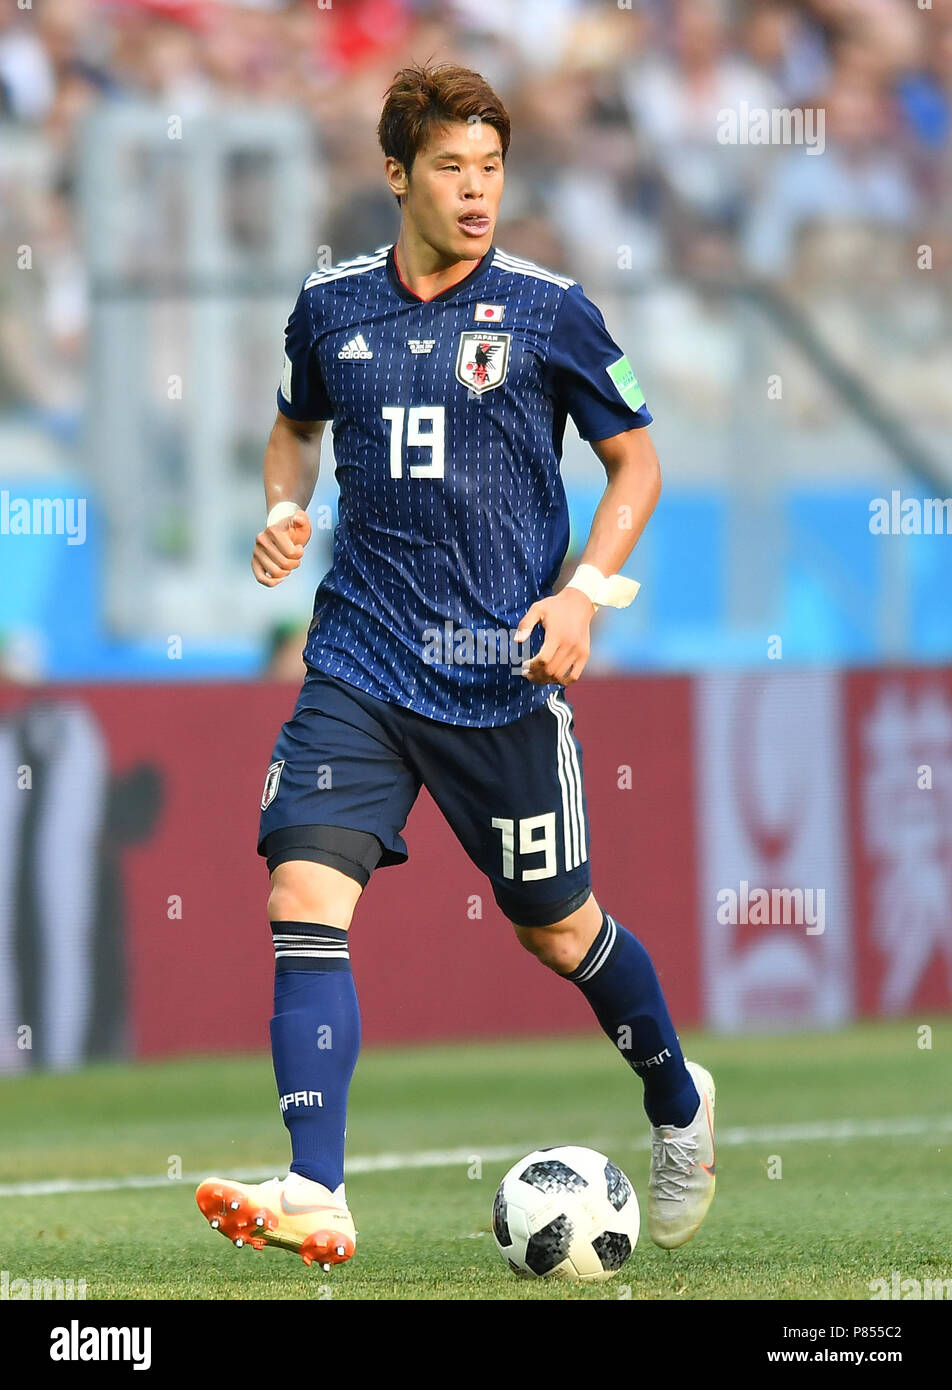 VOLGOGRAD, RUSSIA - JUNE 28: Hiroki Sakai of Japan in action during the 2018 FIFA World Cup Russia group H match between Japan and Poland at Volgograd Arena on June 28, 2018 in Volgograd, Russia. (Photo by Lukasz Laskowski/PressFocus/MB Media/) Stock Photo